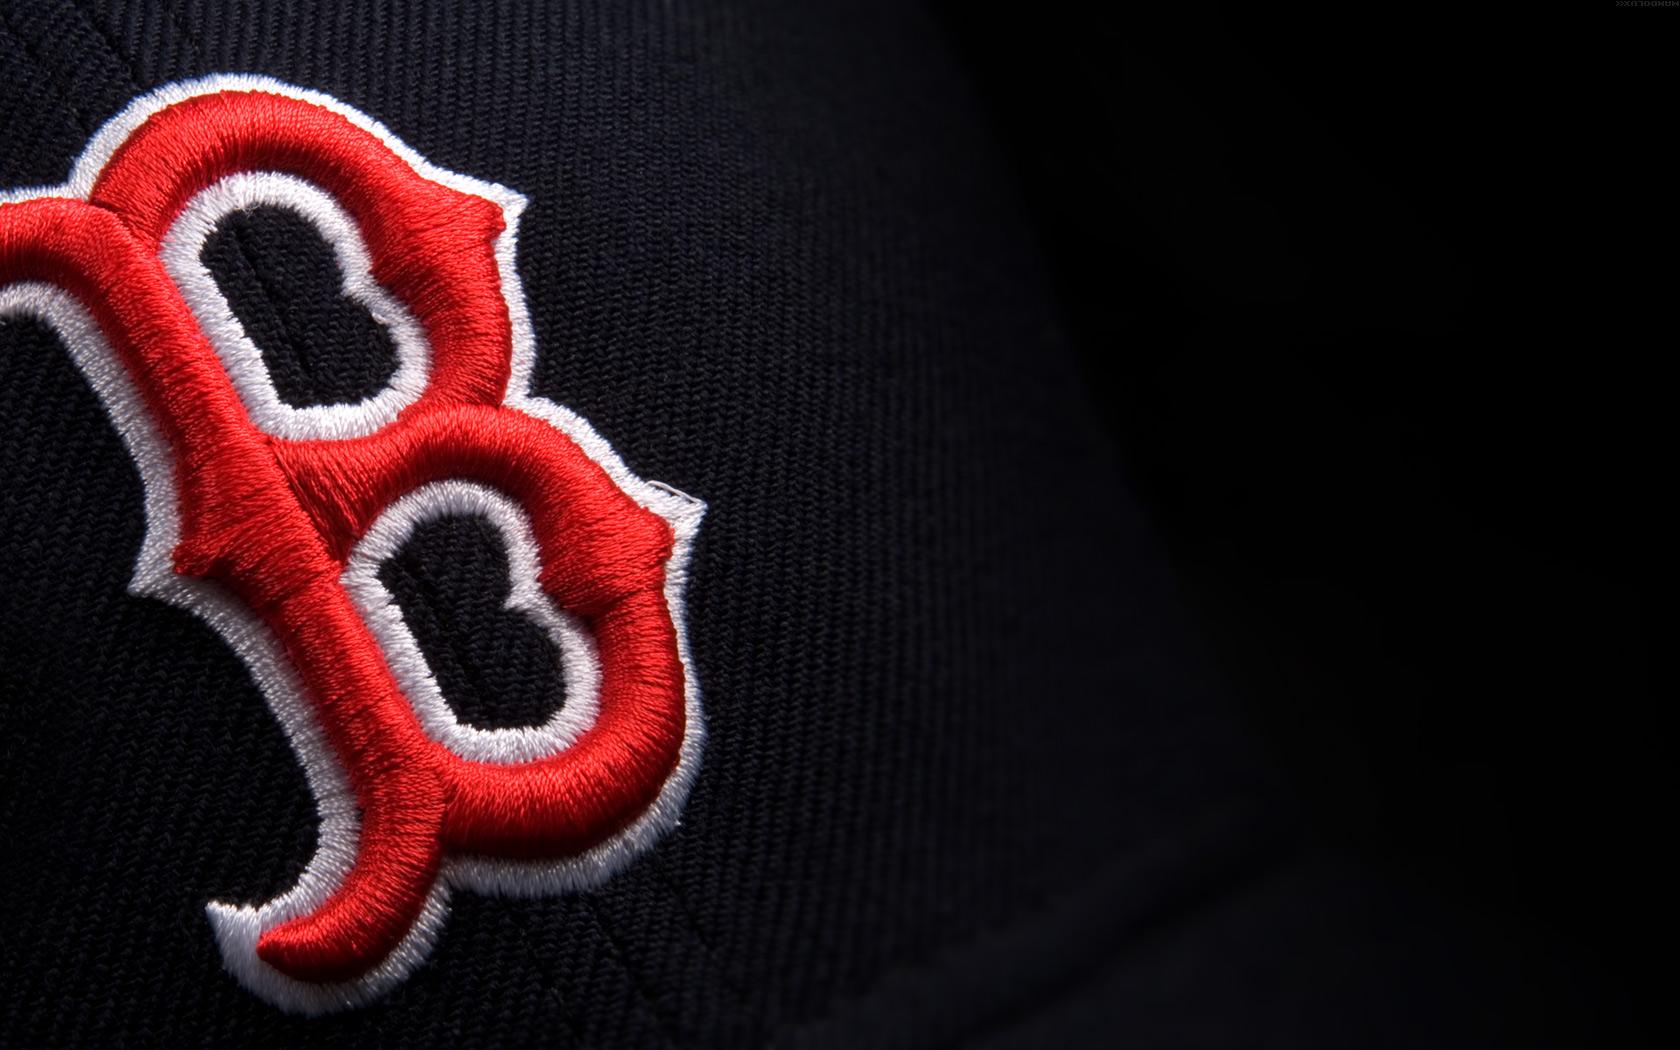 Download the Boston Red Sox Wallpaper, Boston Red Sox iPhone